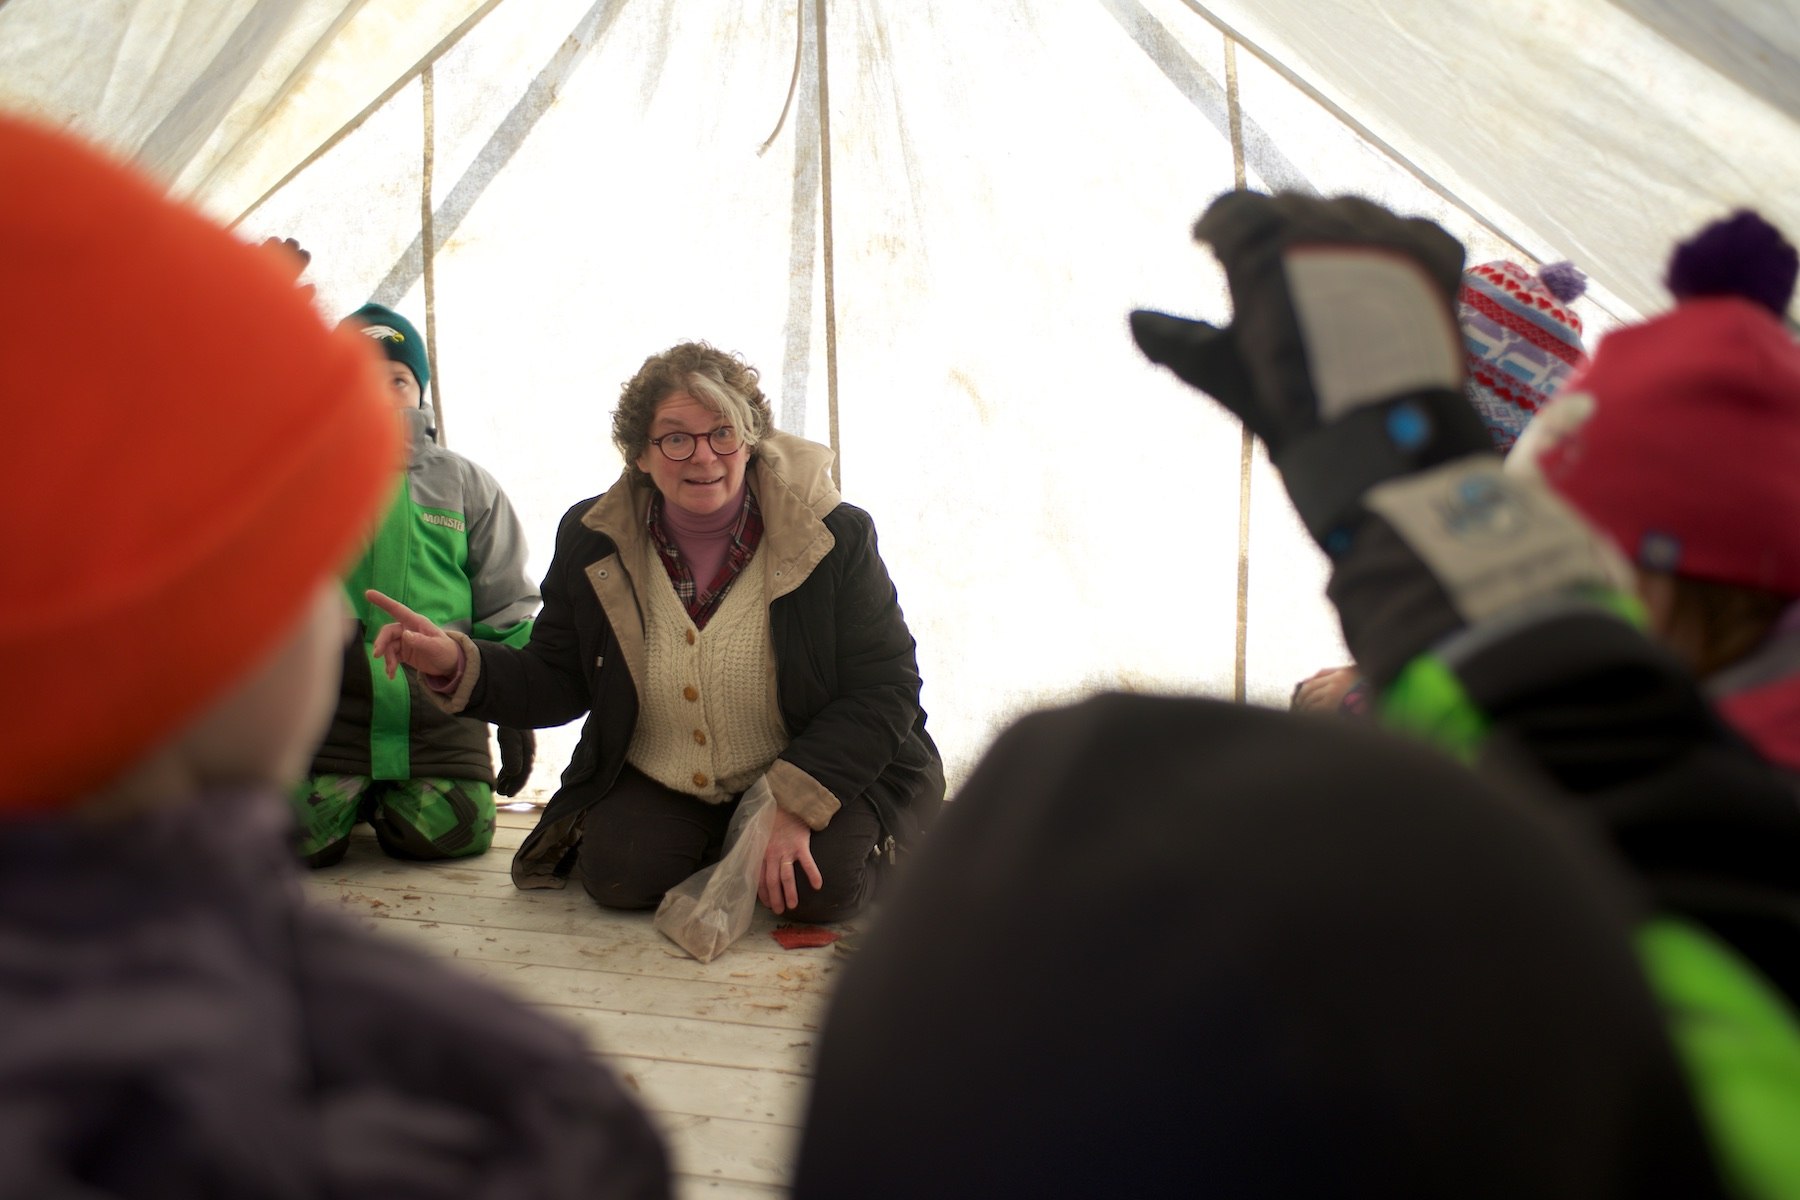 School children sit in a tent as a Canadian Canoe Museum staff member provides instructions. A student raises their hand.